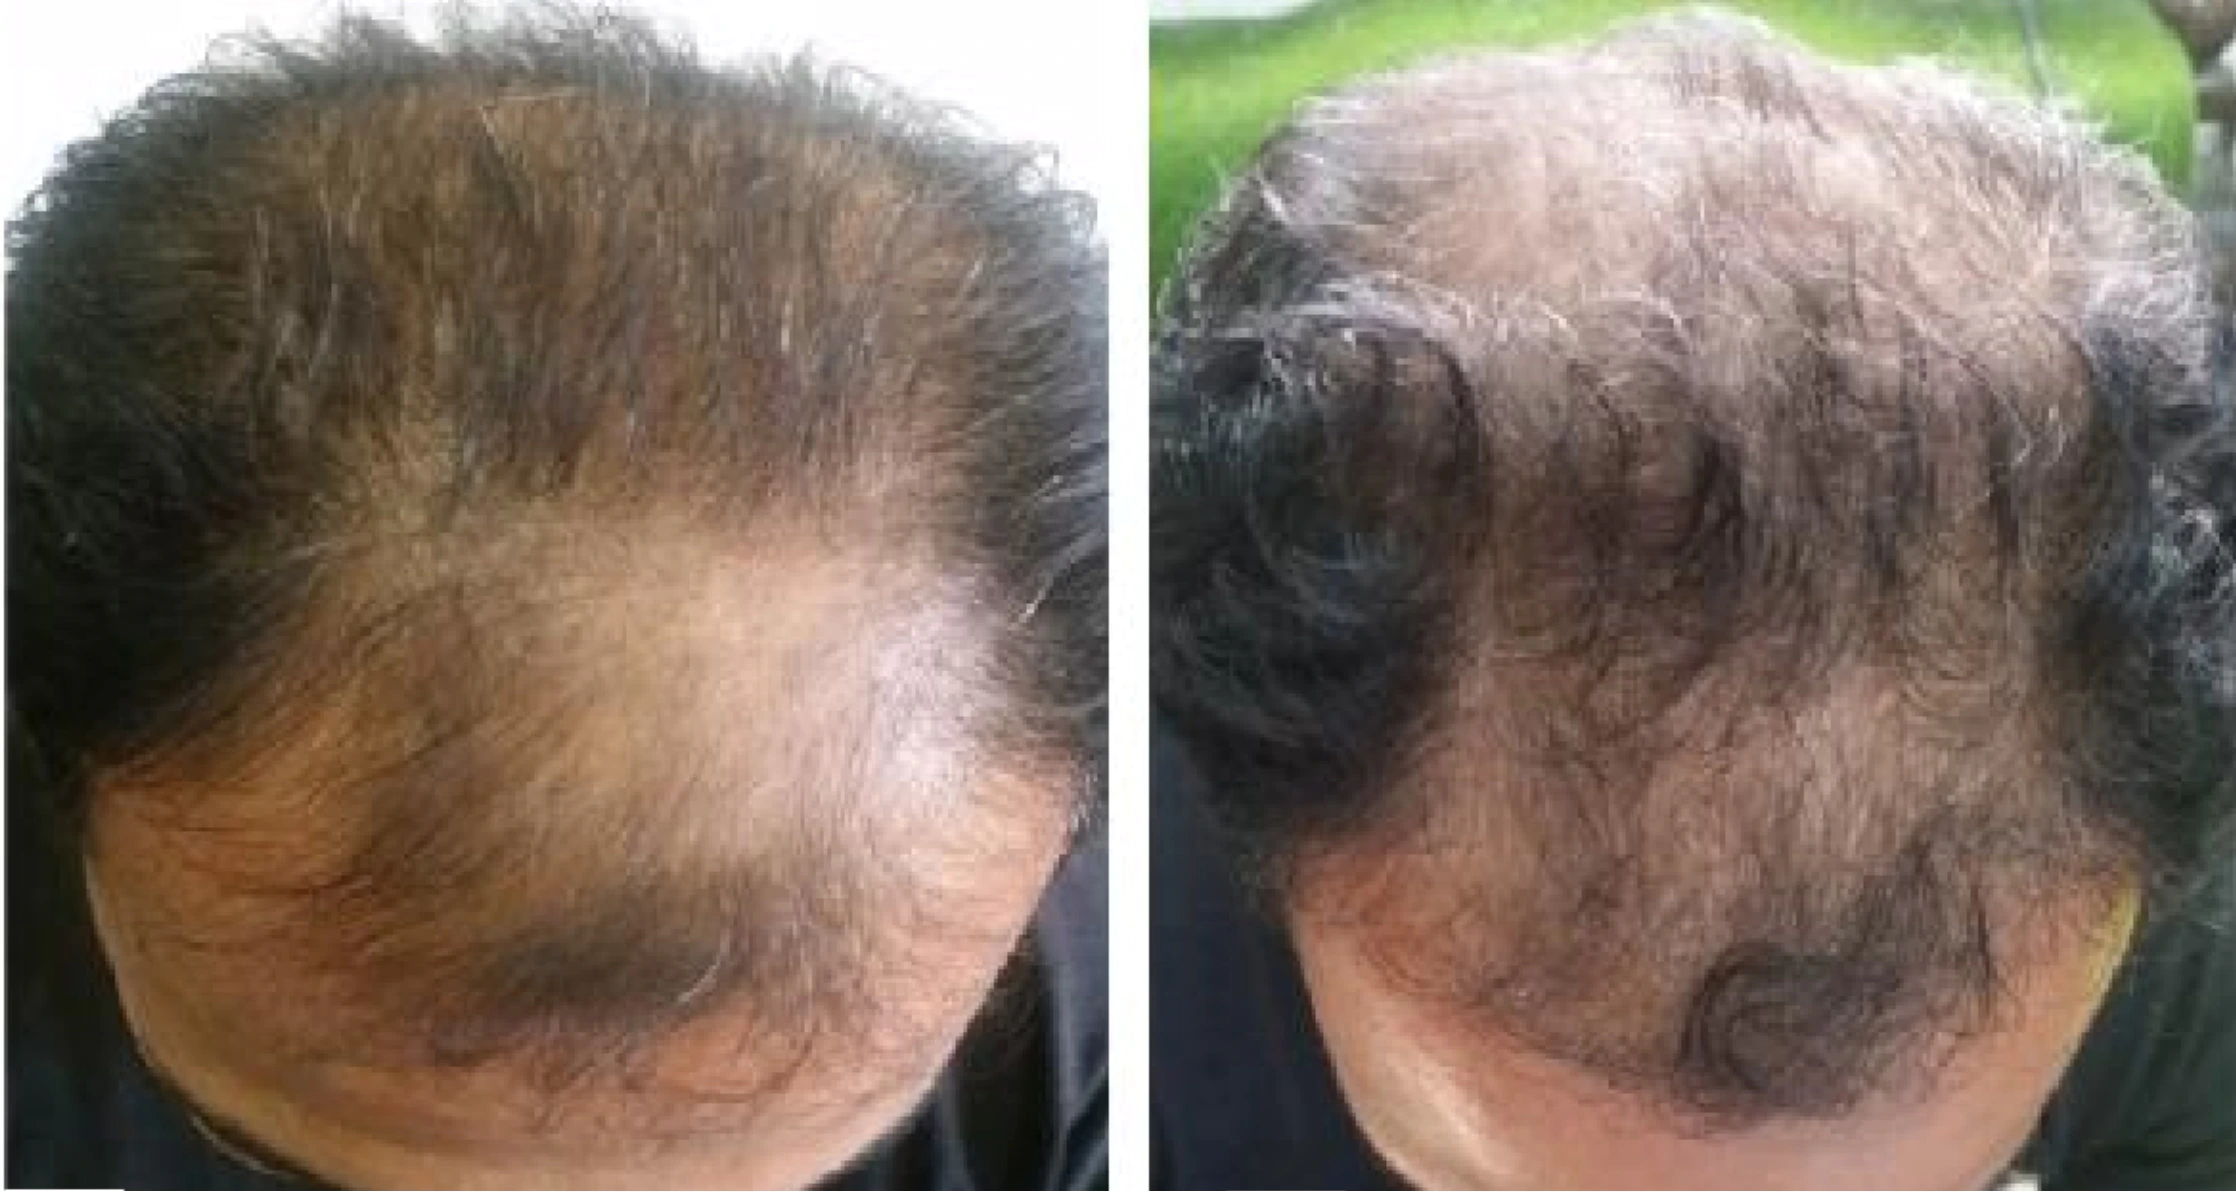 Patient before and after 6 months of using Dutasteride and micro-needling